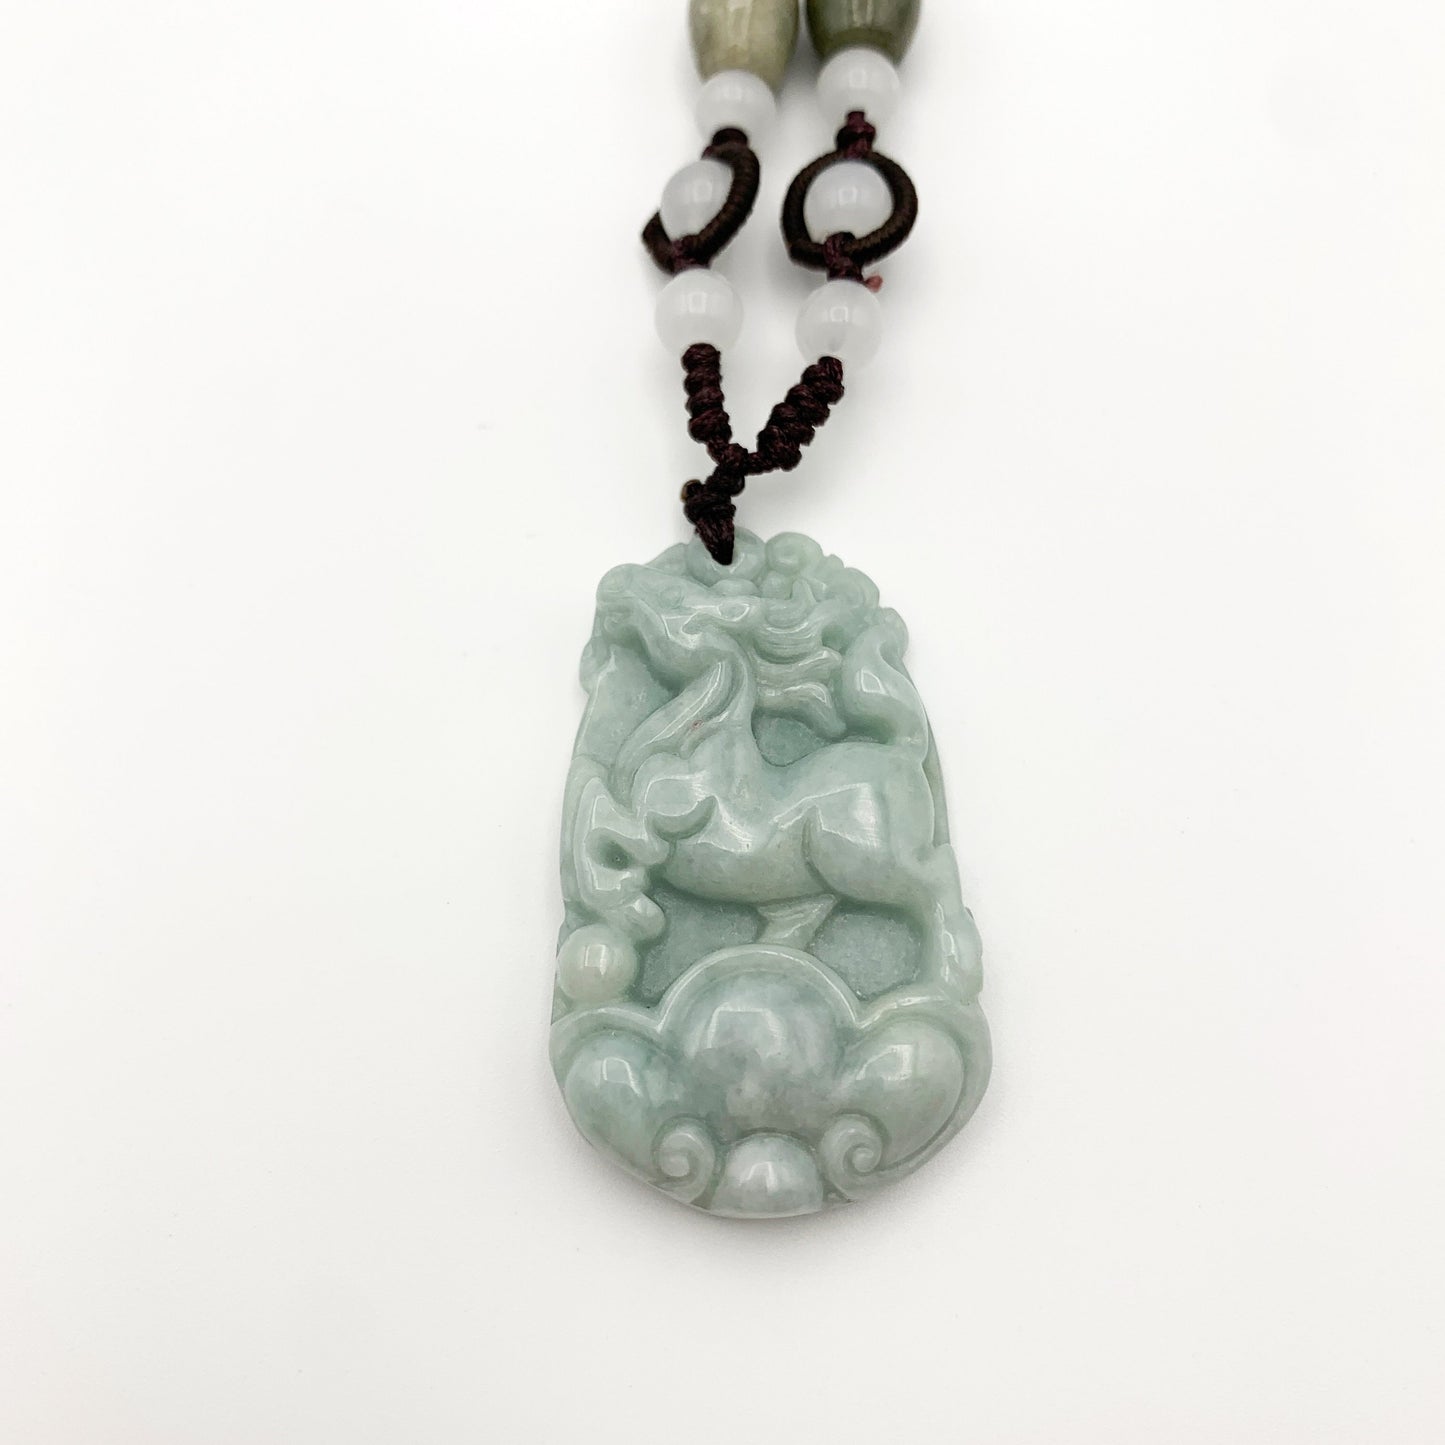 Horse Jade Chinese Zodiac Rustic Carved Pendant Necklace, YW-0110-1646517385 - AriaDesignCollection